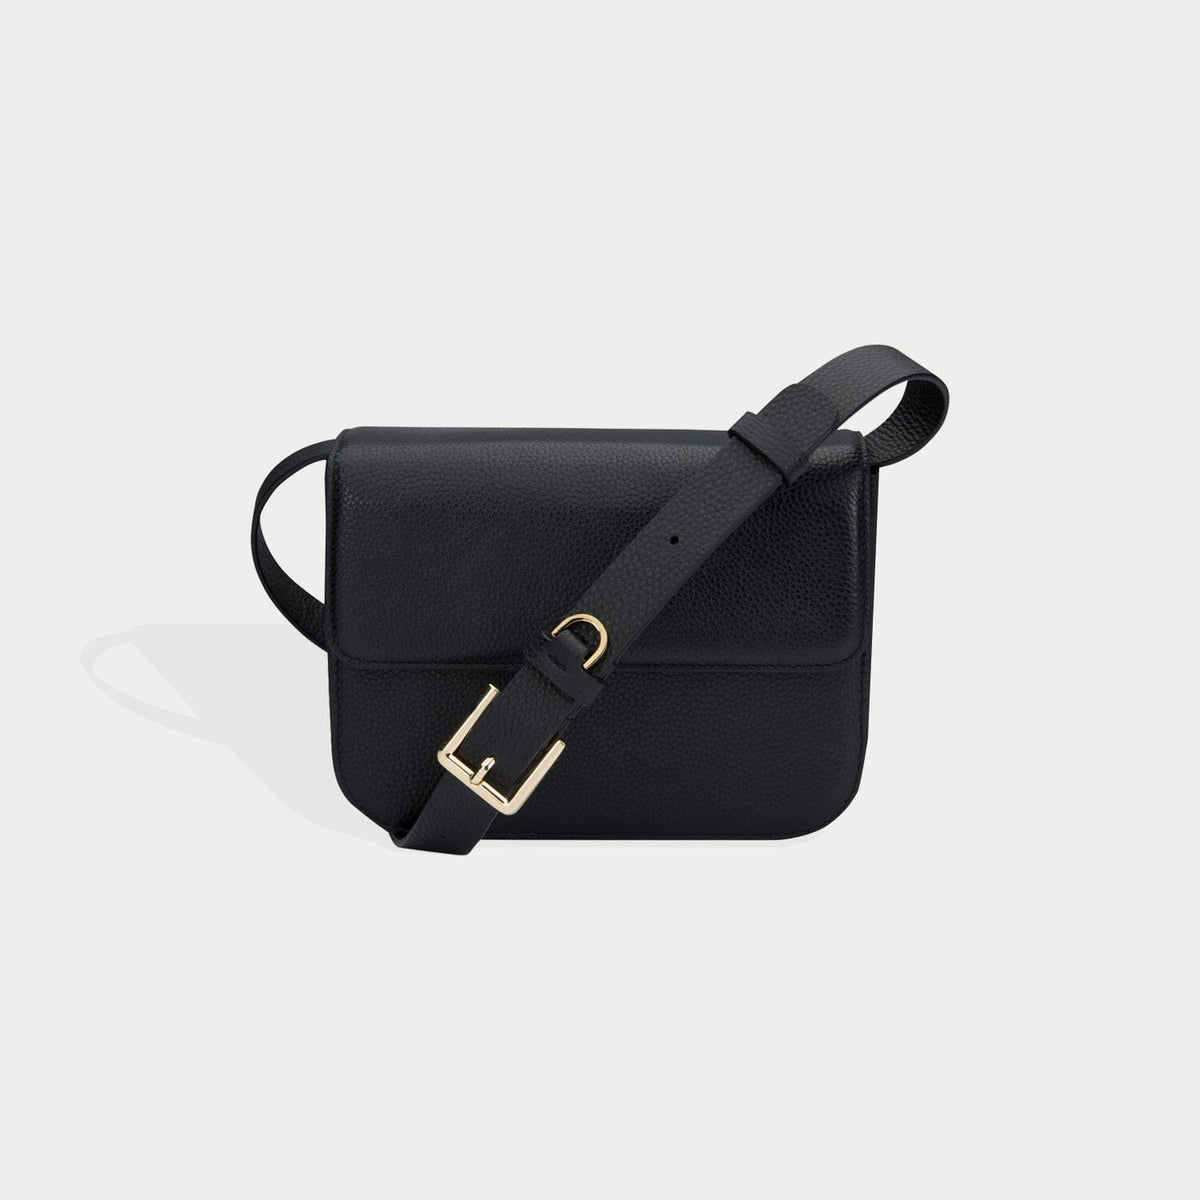 Small Leather Bag in GOLD. Cross Body Bag Shoulder Bag in 